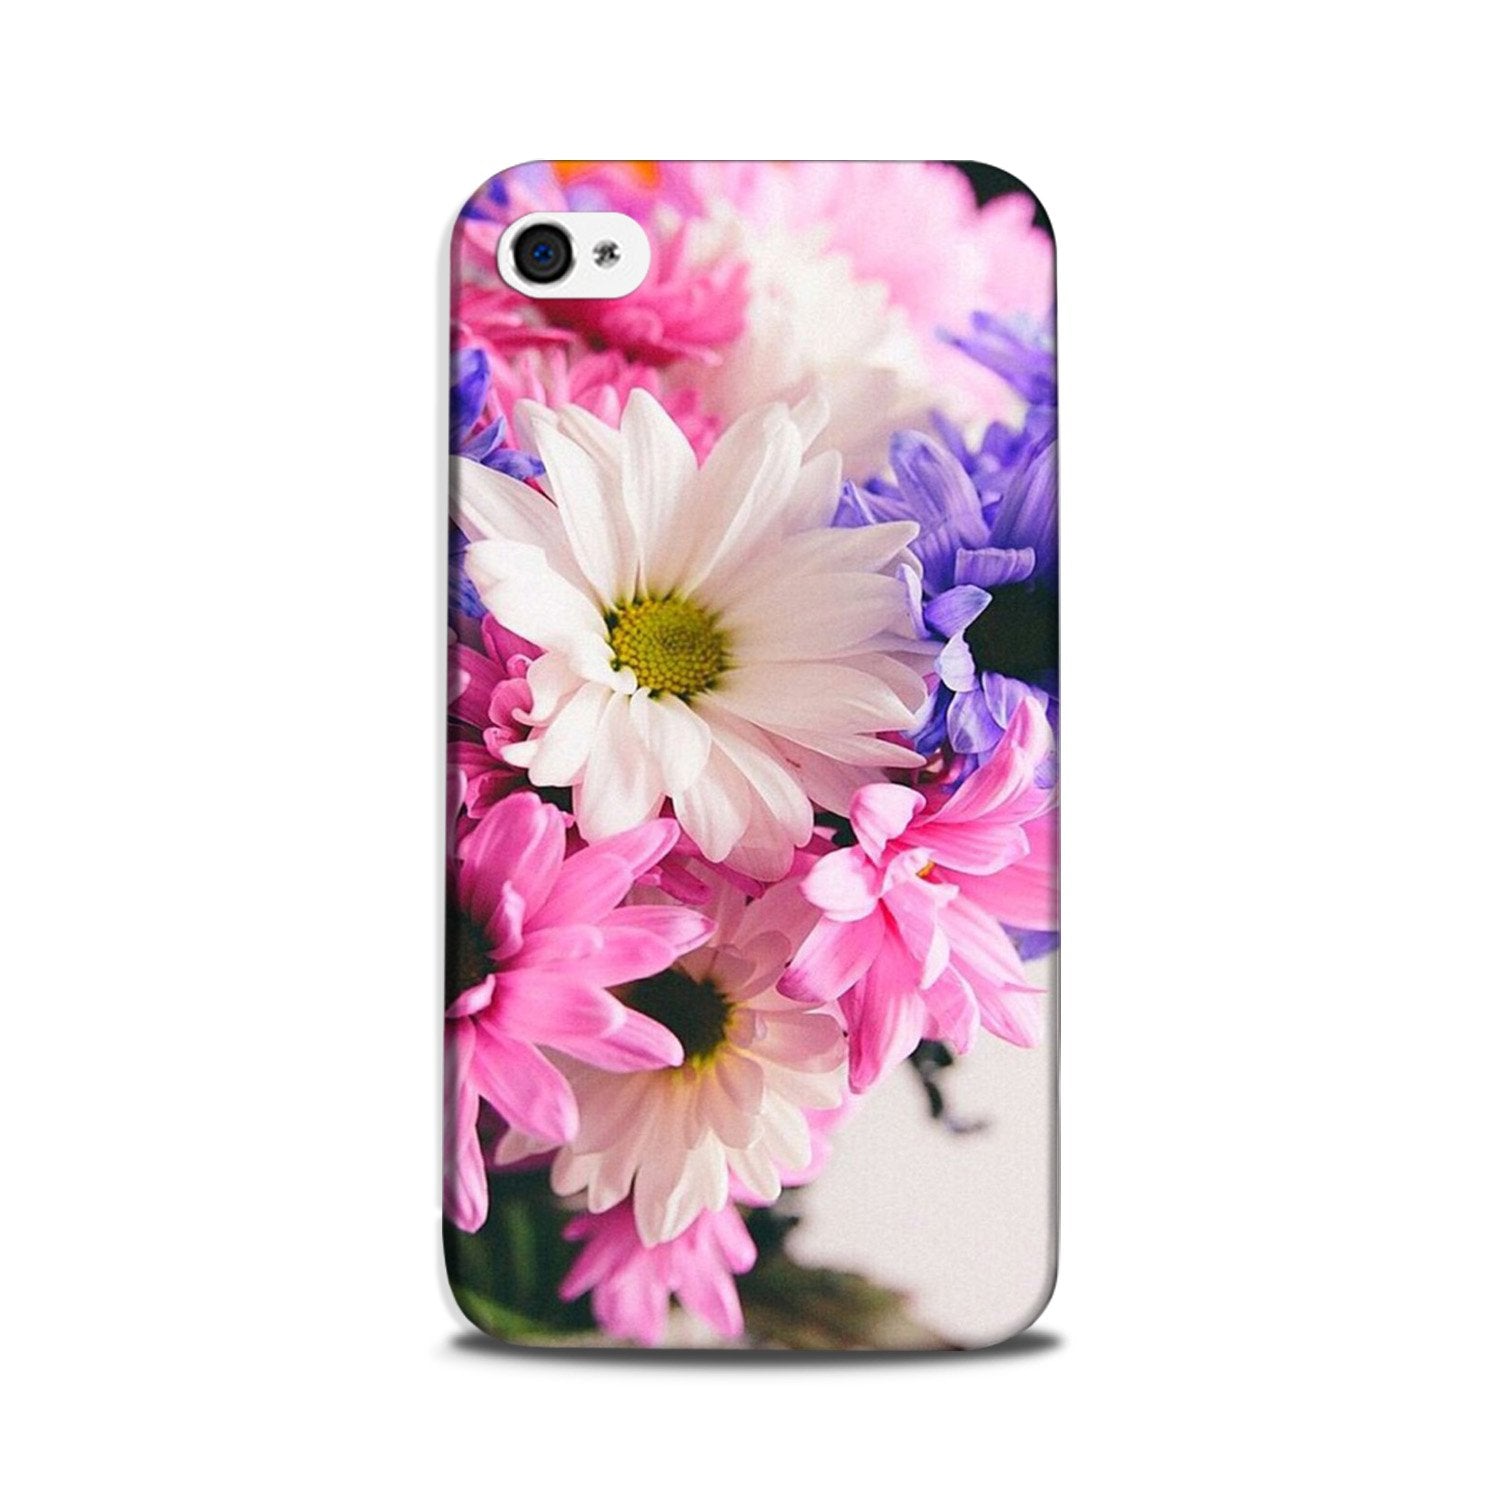 Coloful Daisy Case for iPhone 5/ 5s